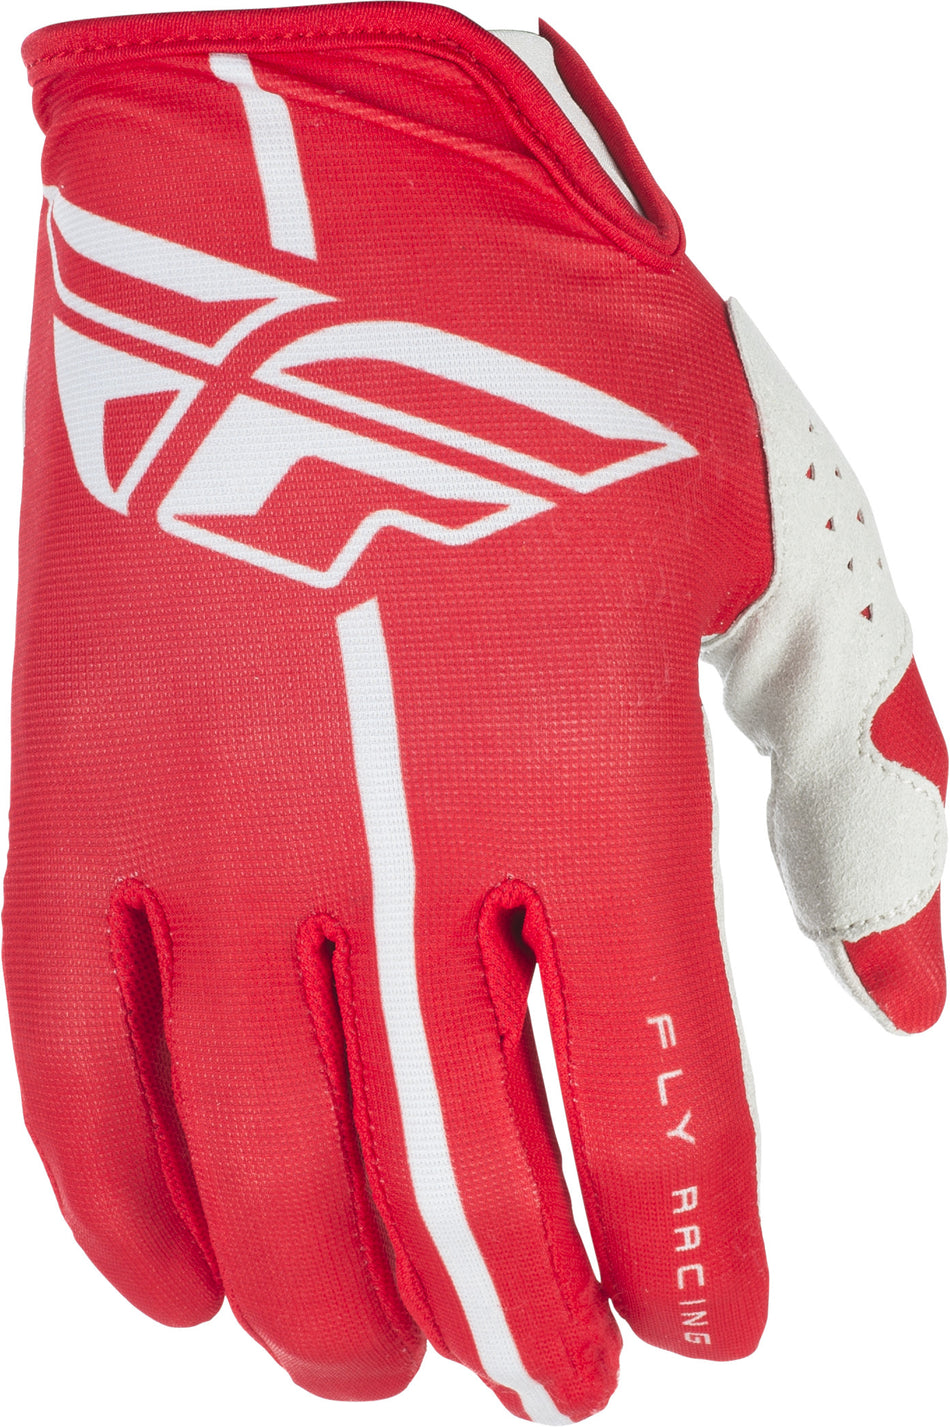 FLY RACING Lite Gloves Red/Grey Sz 6 371-01206